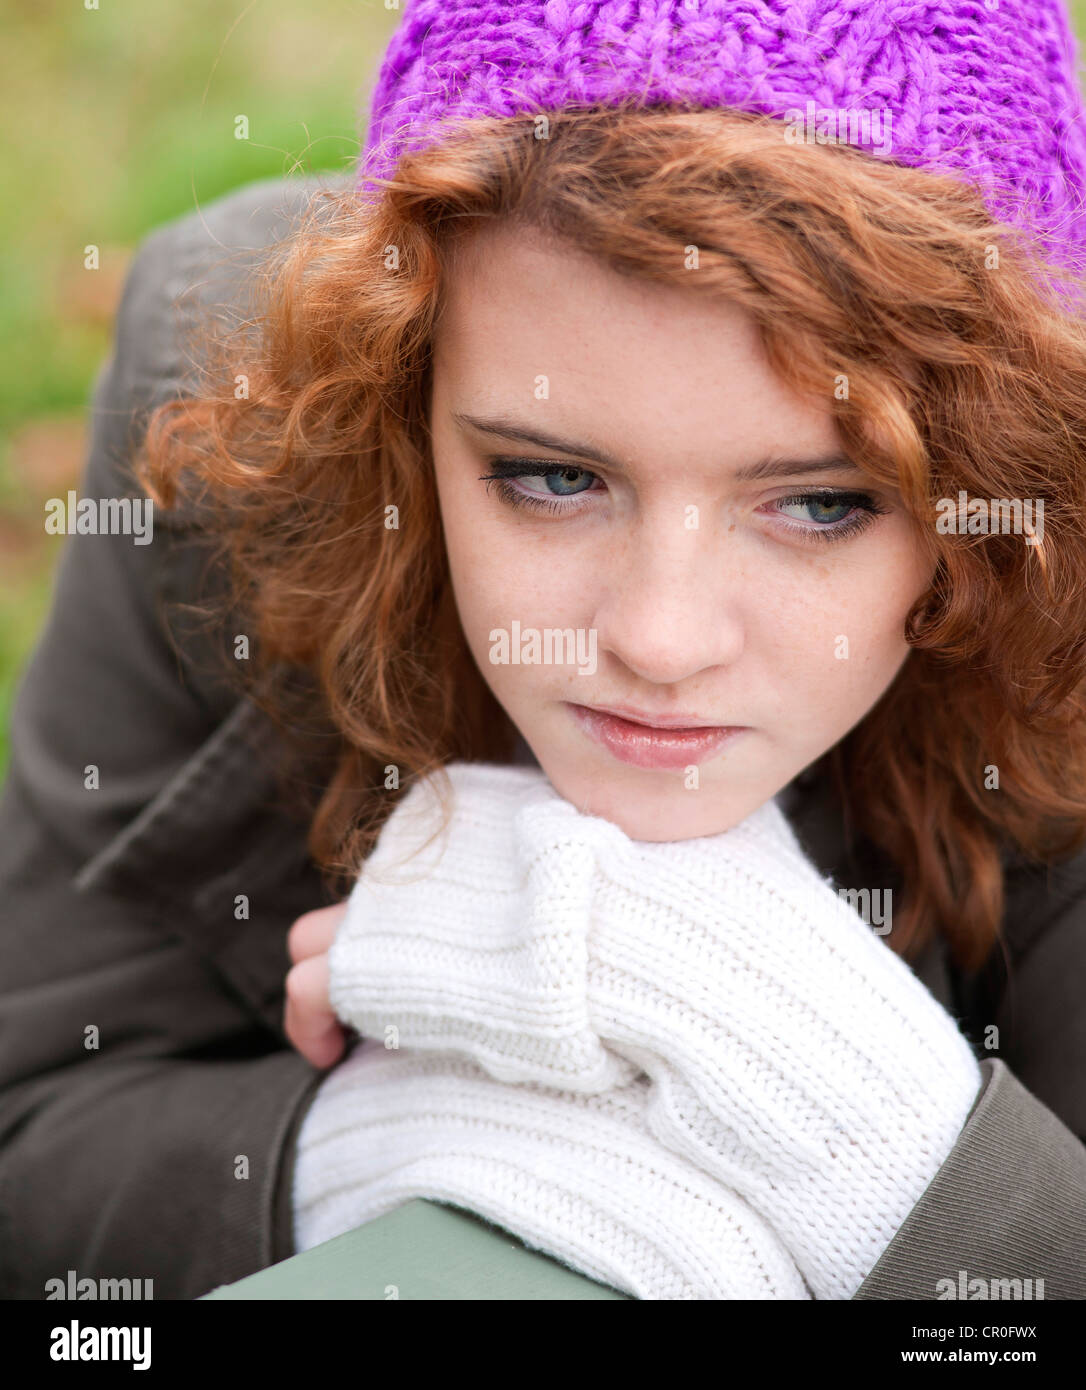 Girl wearing a woollen cap with a dreamy expression, portrait Stock Photo